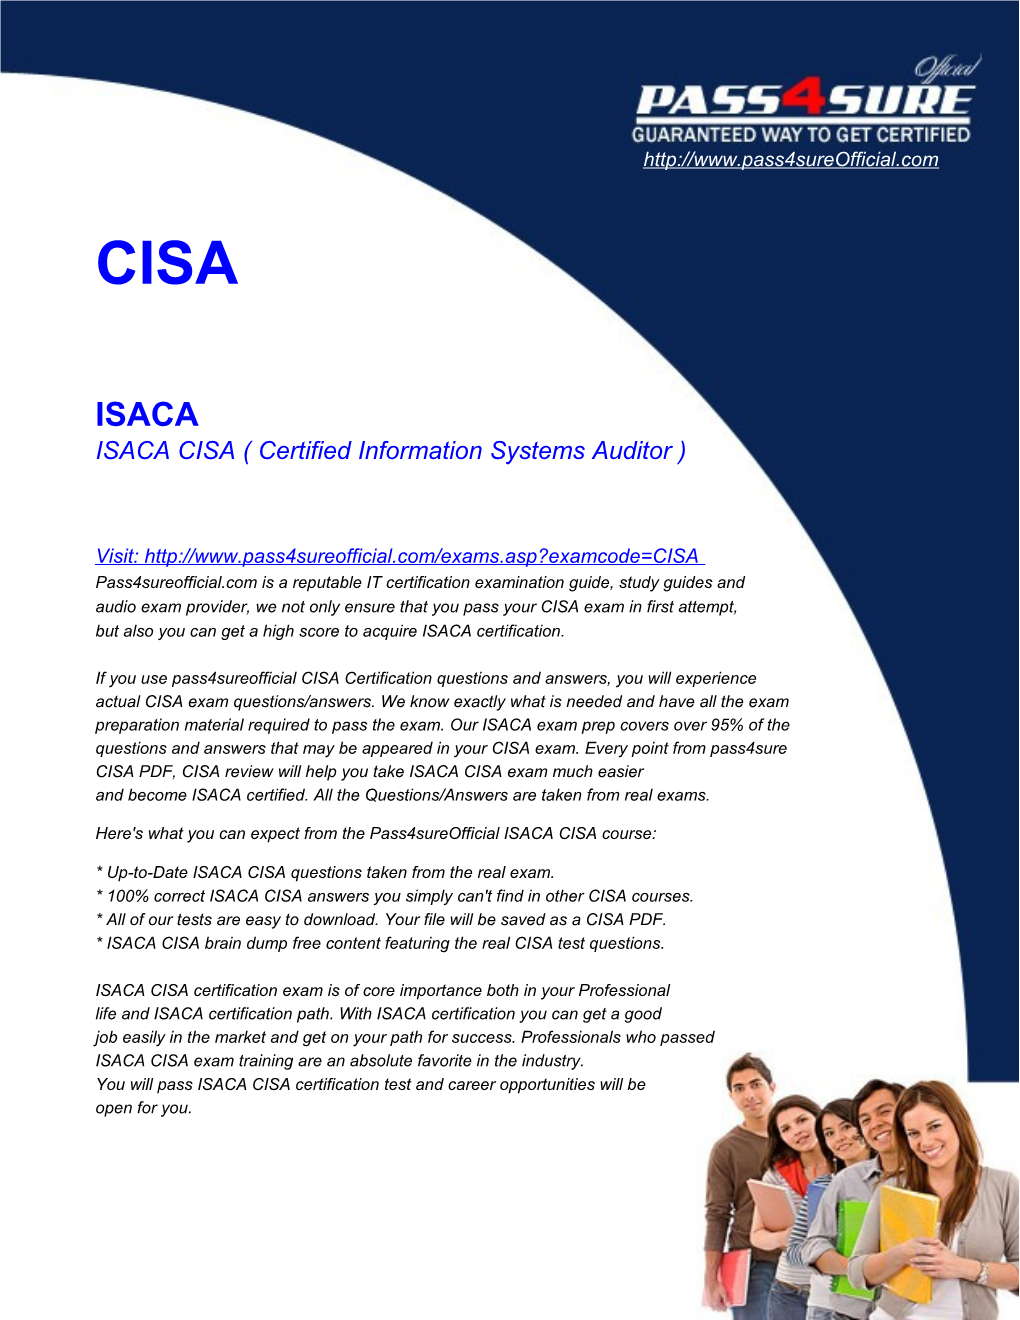 ISACA CISA ( Certified Information Systems Auditor )